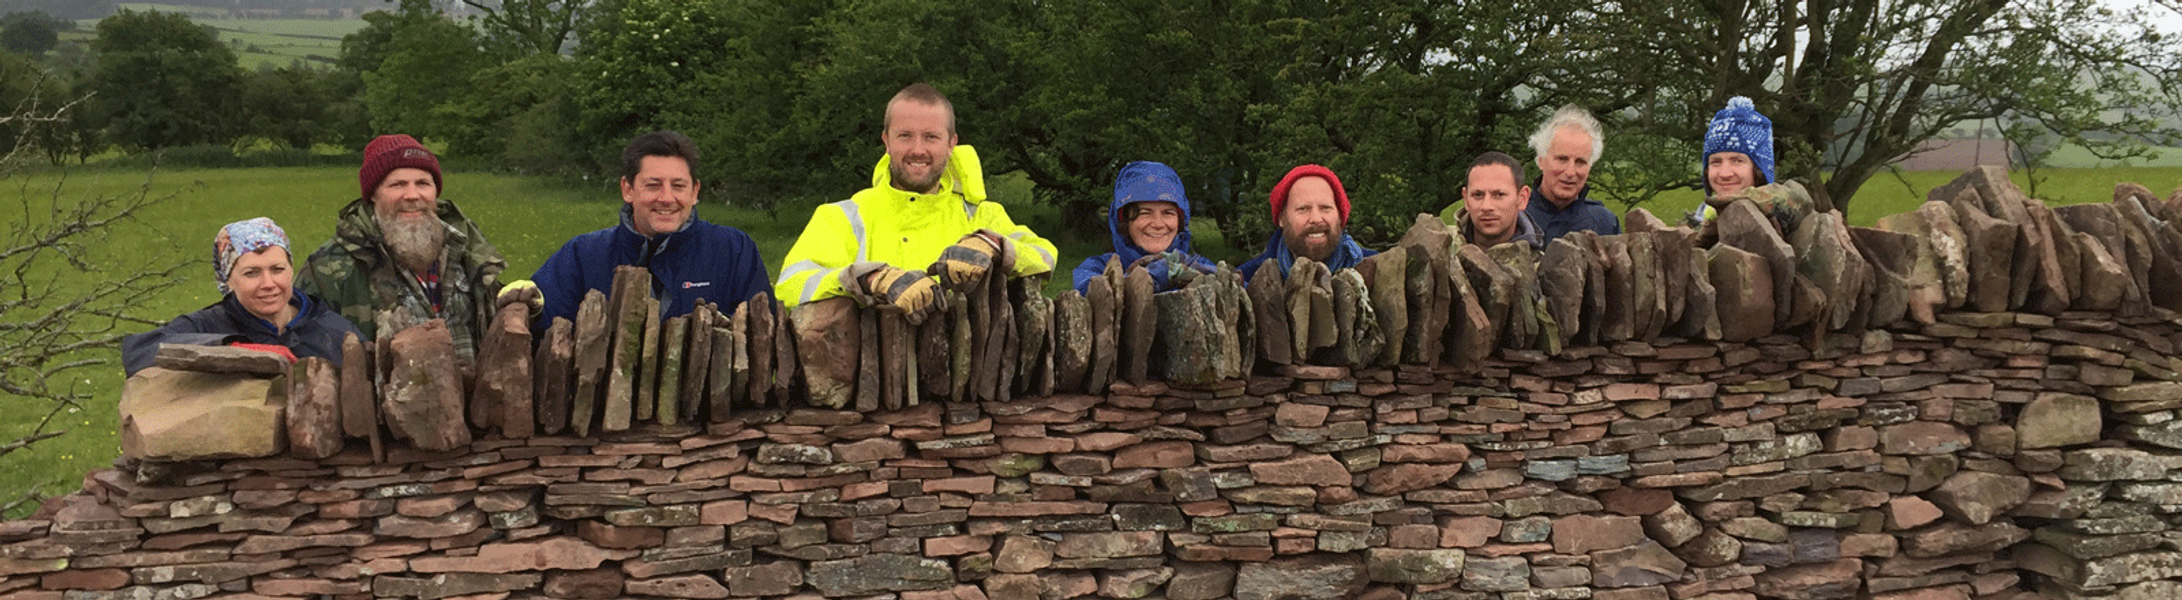 Dry Stone Walling in Wales